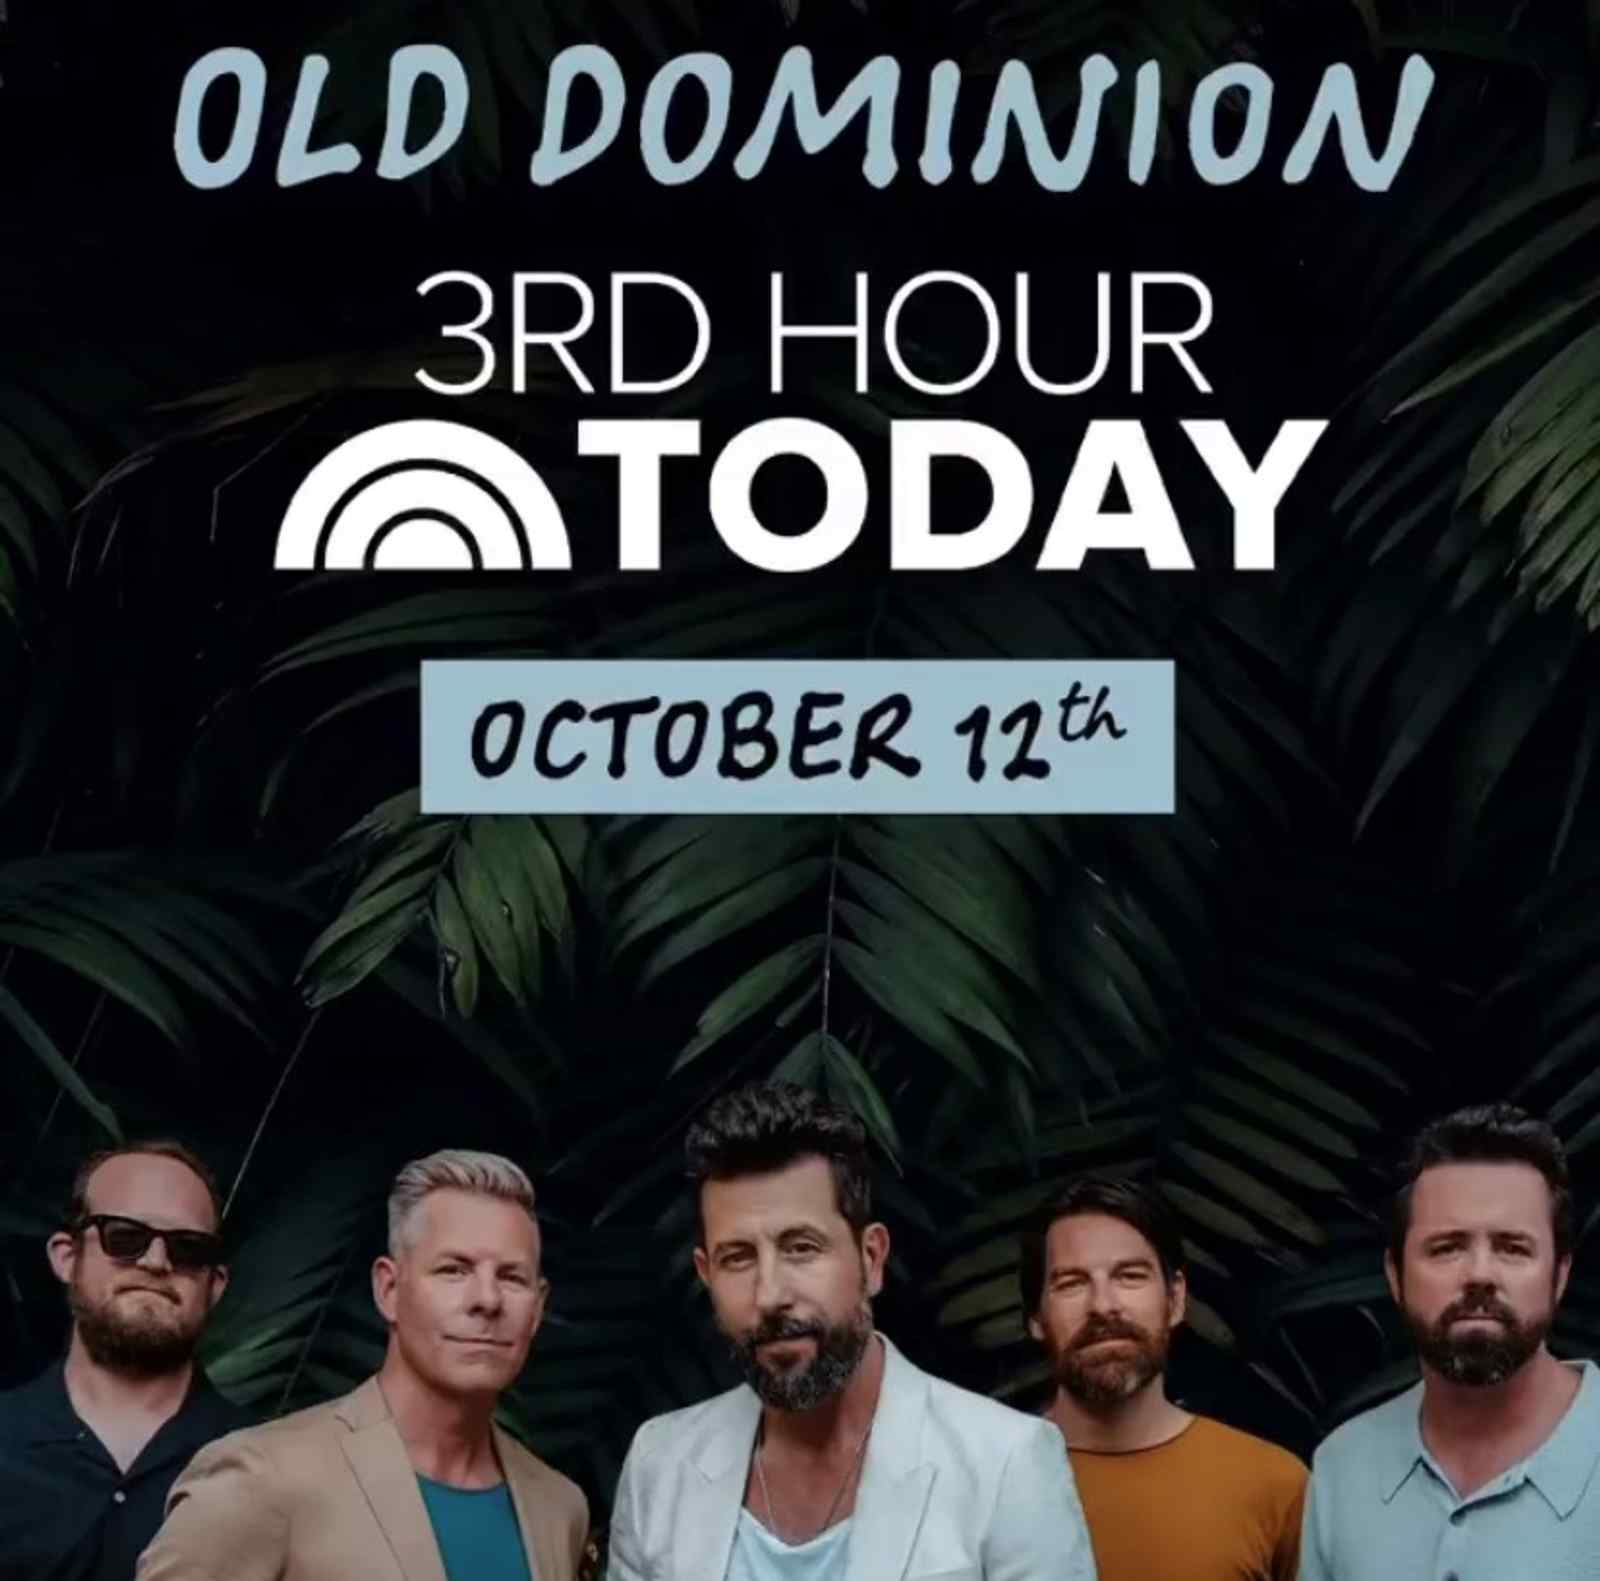 TODAY Show: Old Dominion